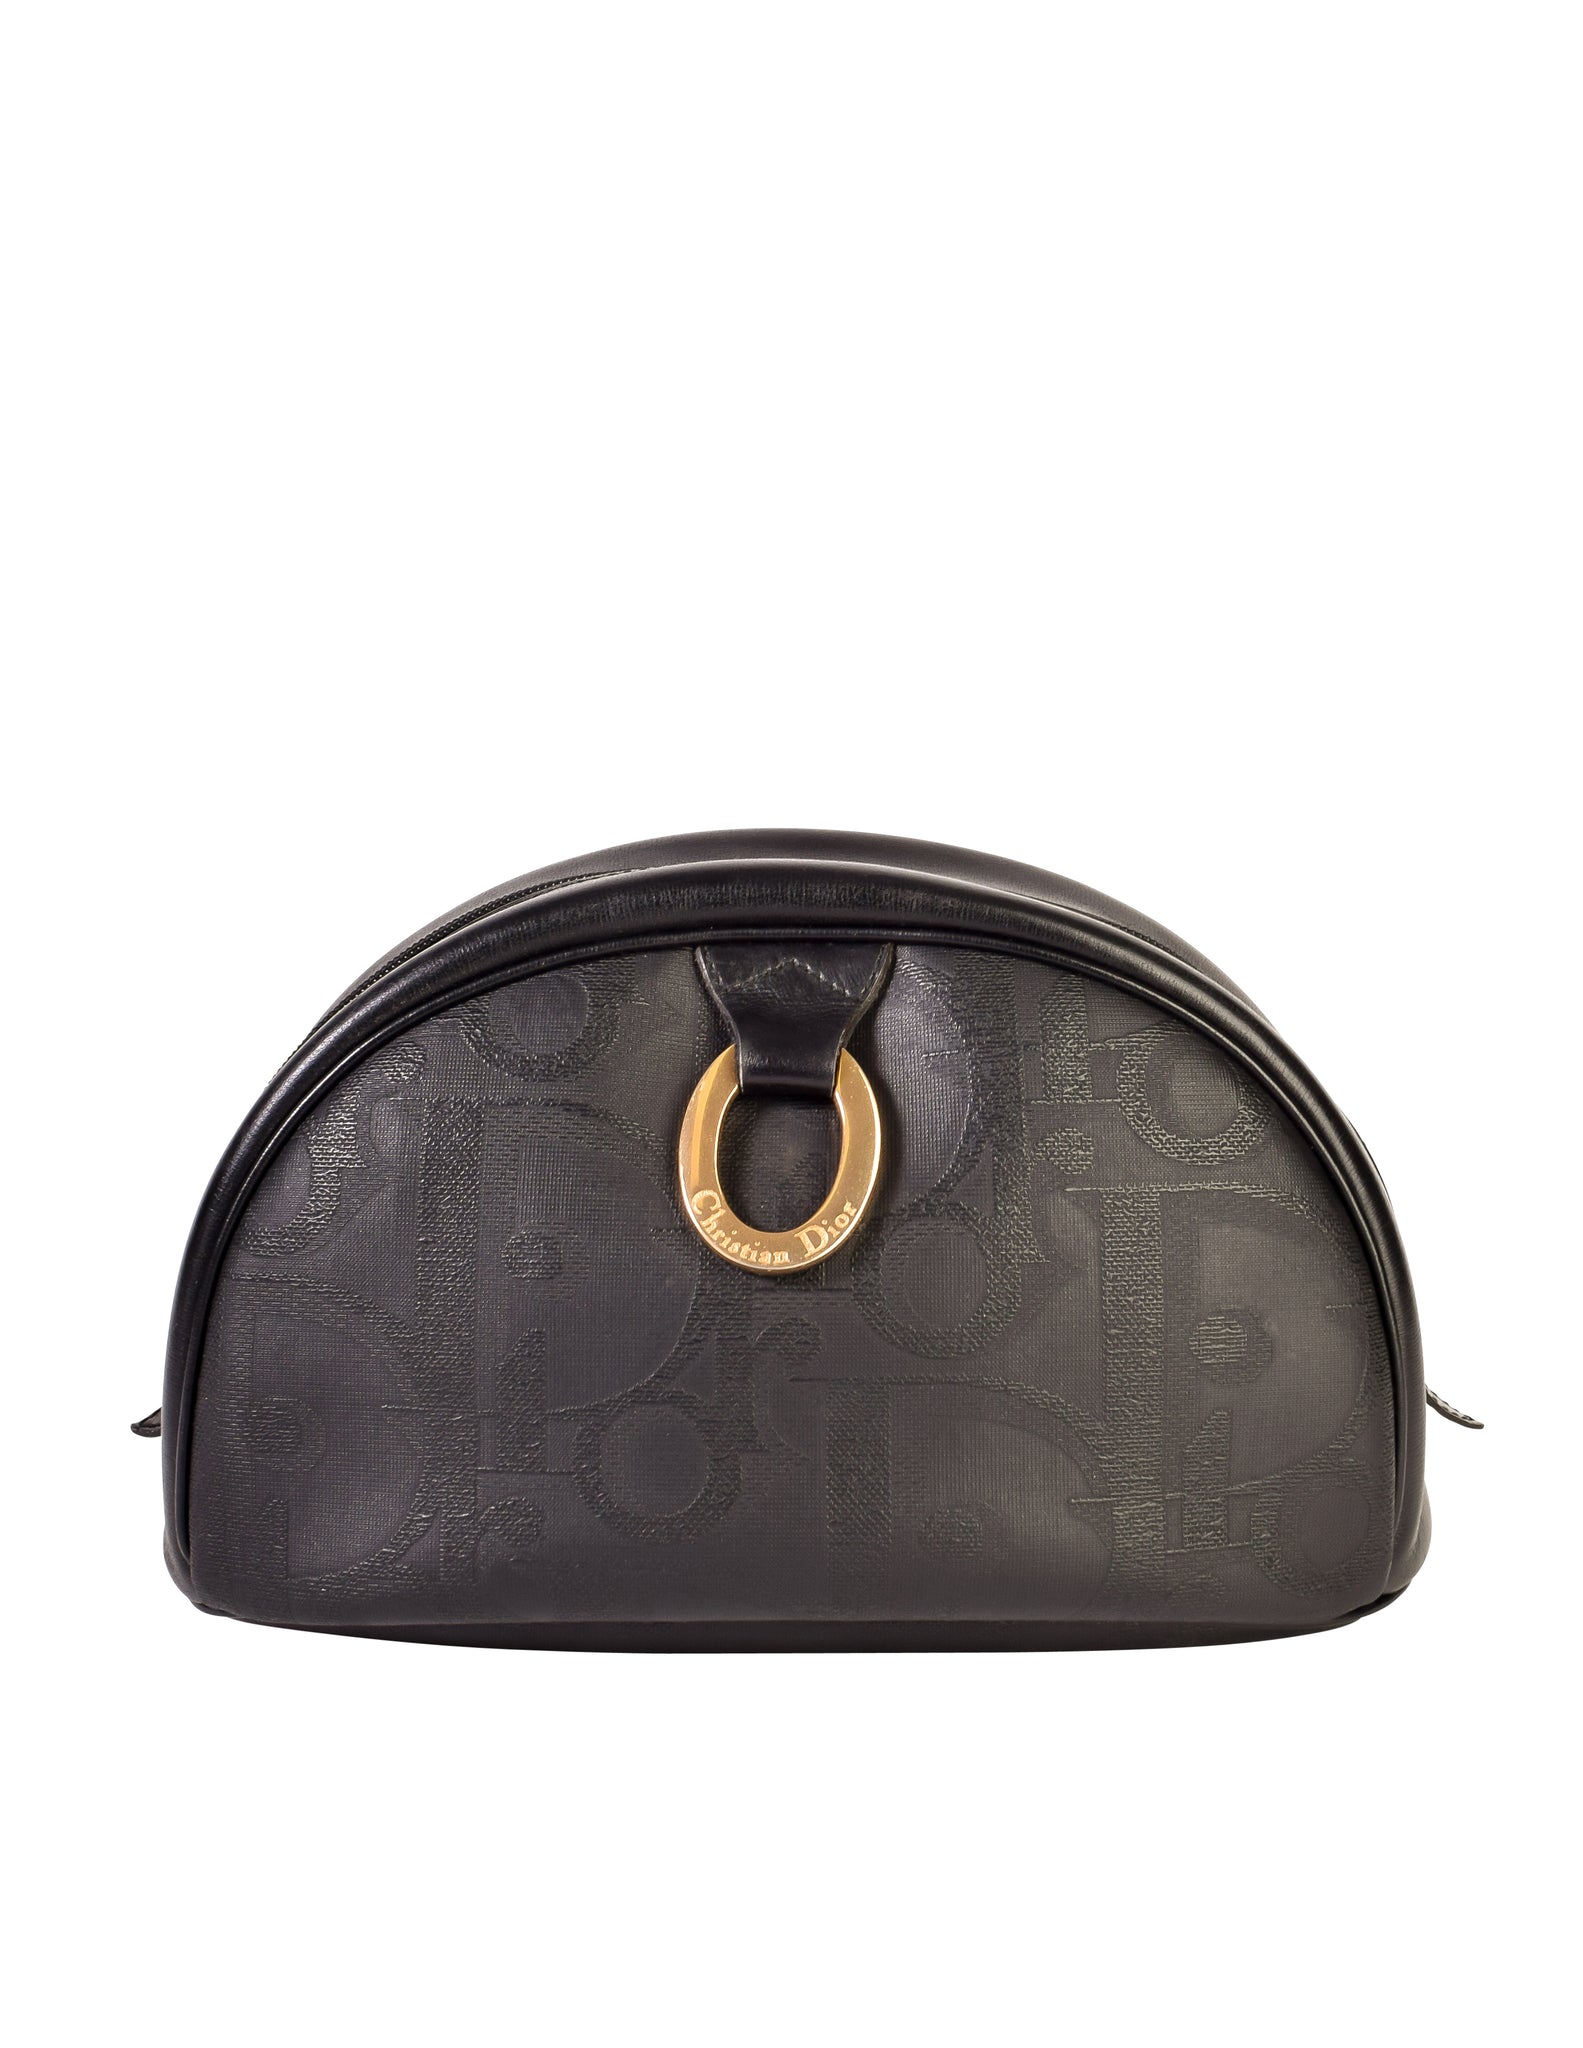 Christian Dior Vintage Black Leather Coated Canvas Monogram Cosmetic Toiletry Travel Clutch Bag